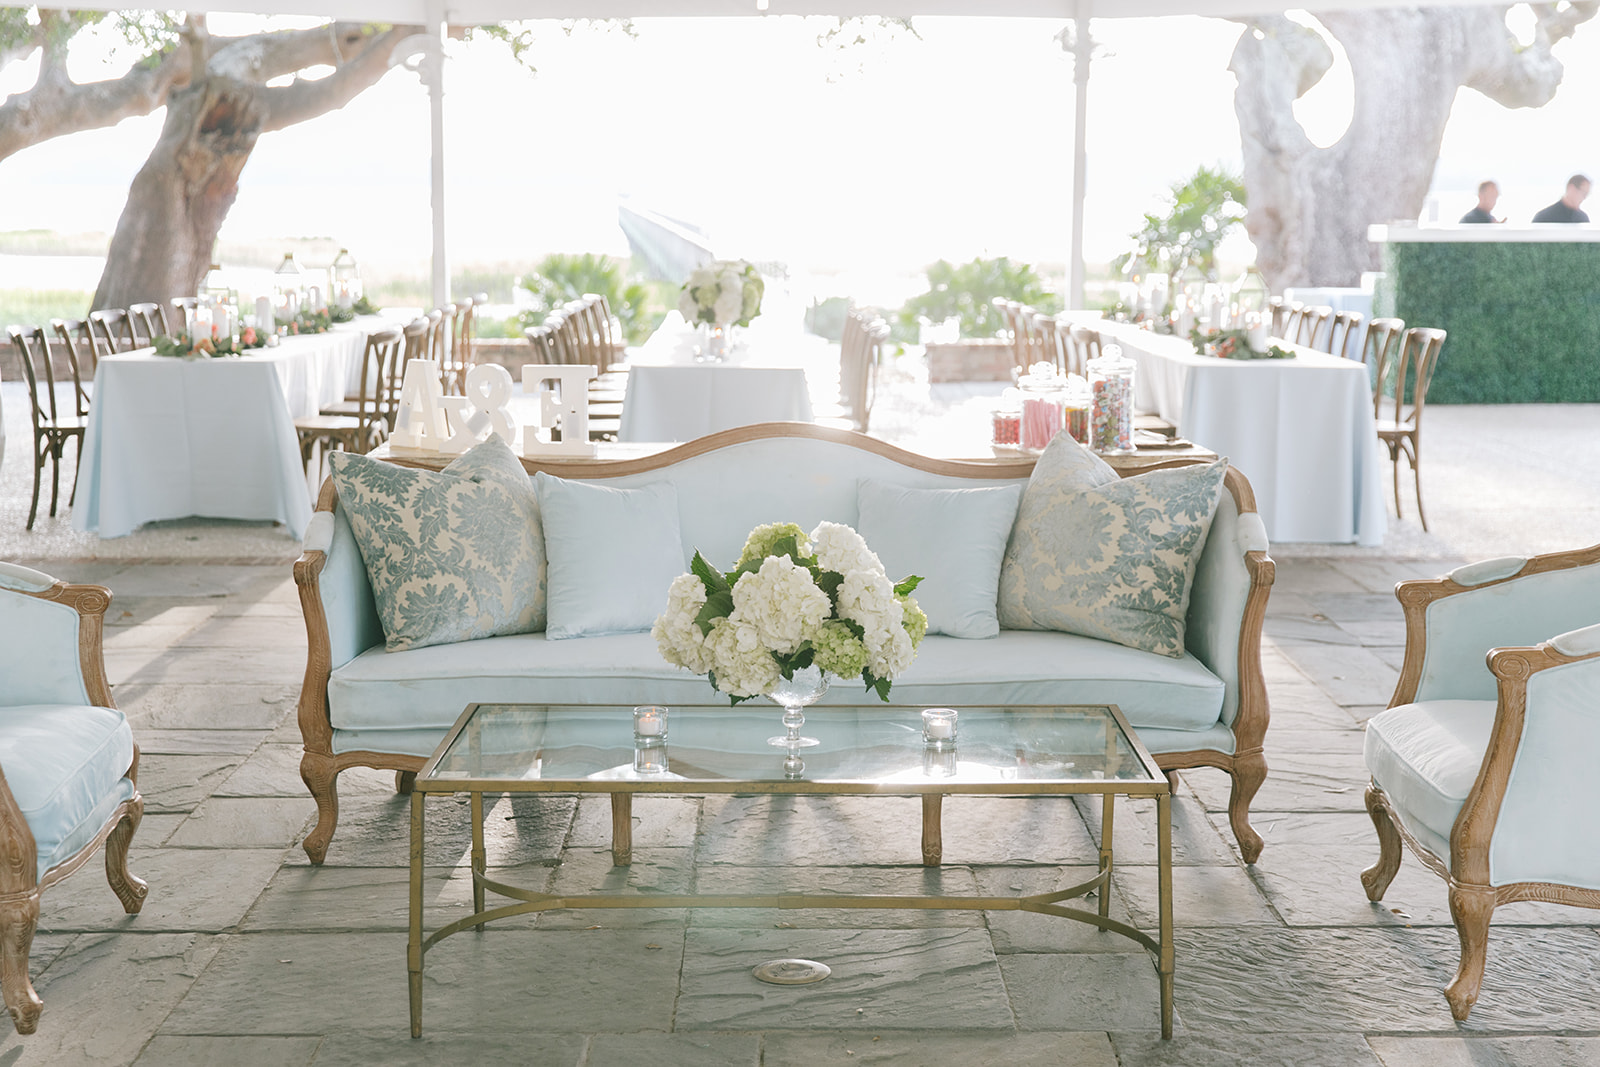 Classic details at an Intimate waterfront wedding at Lowndes Grove